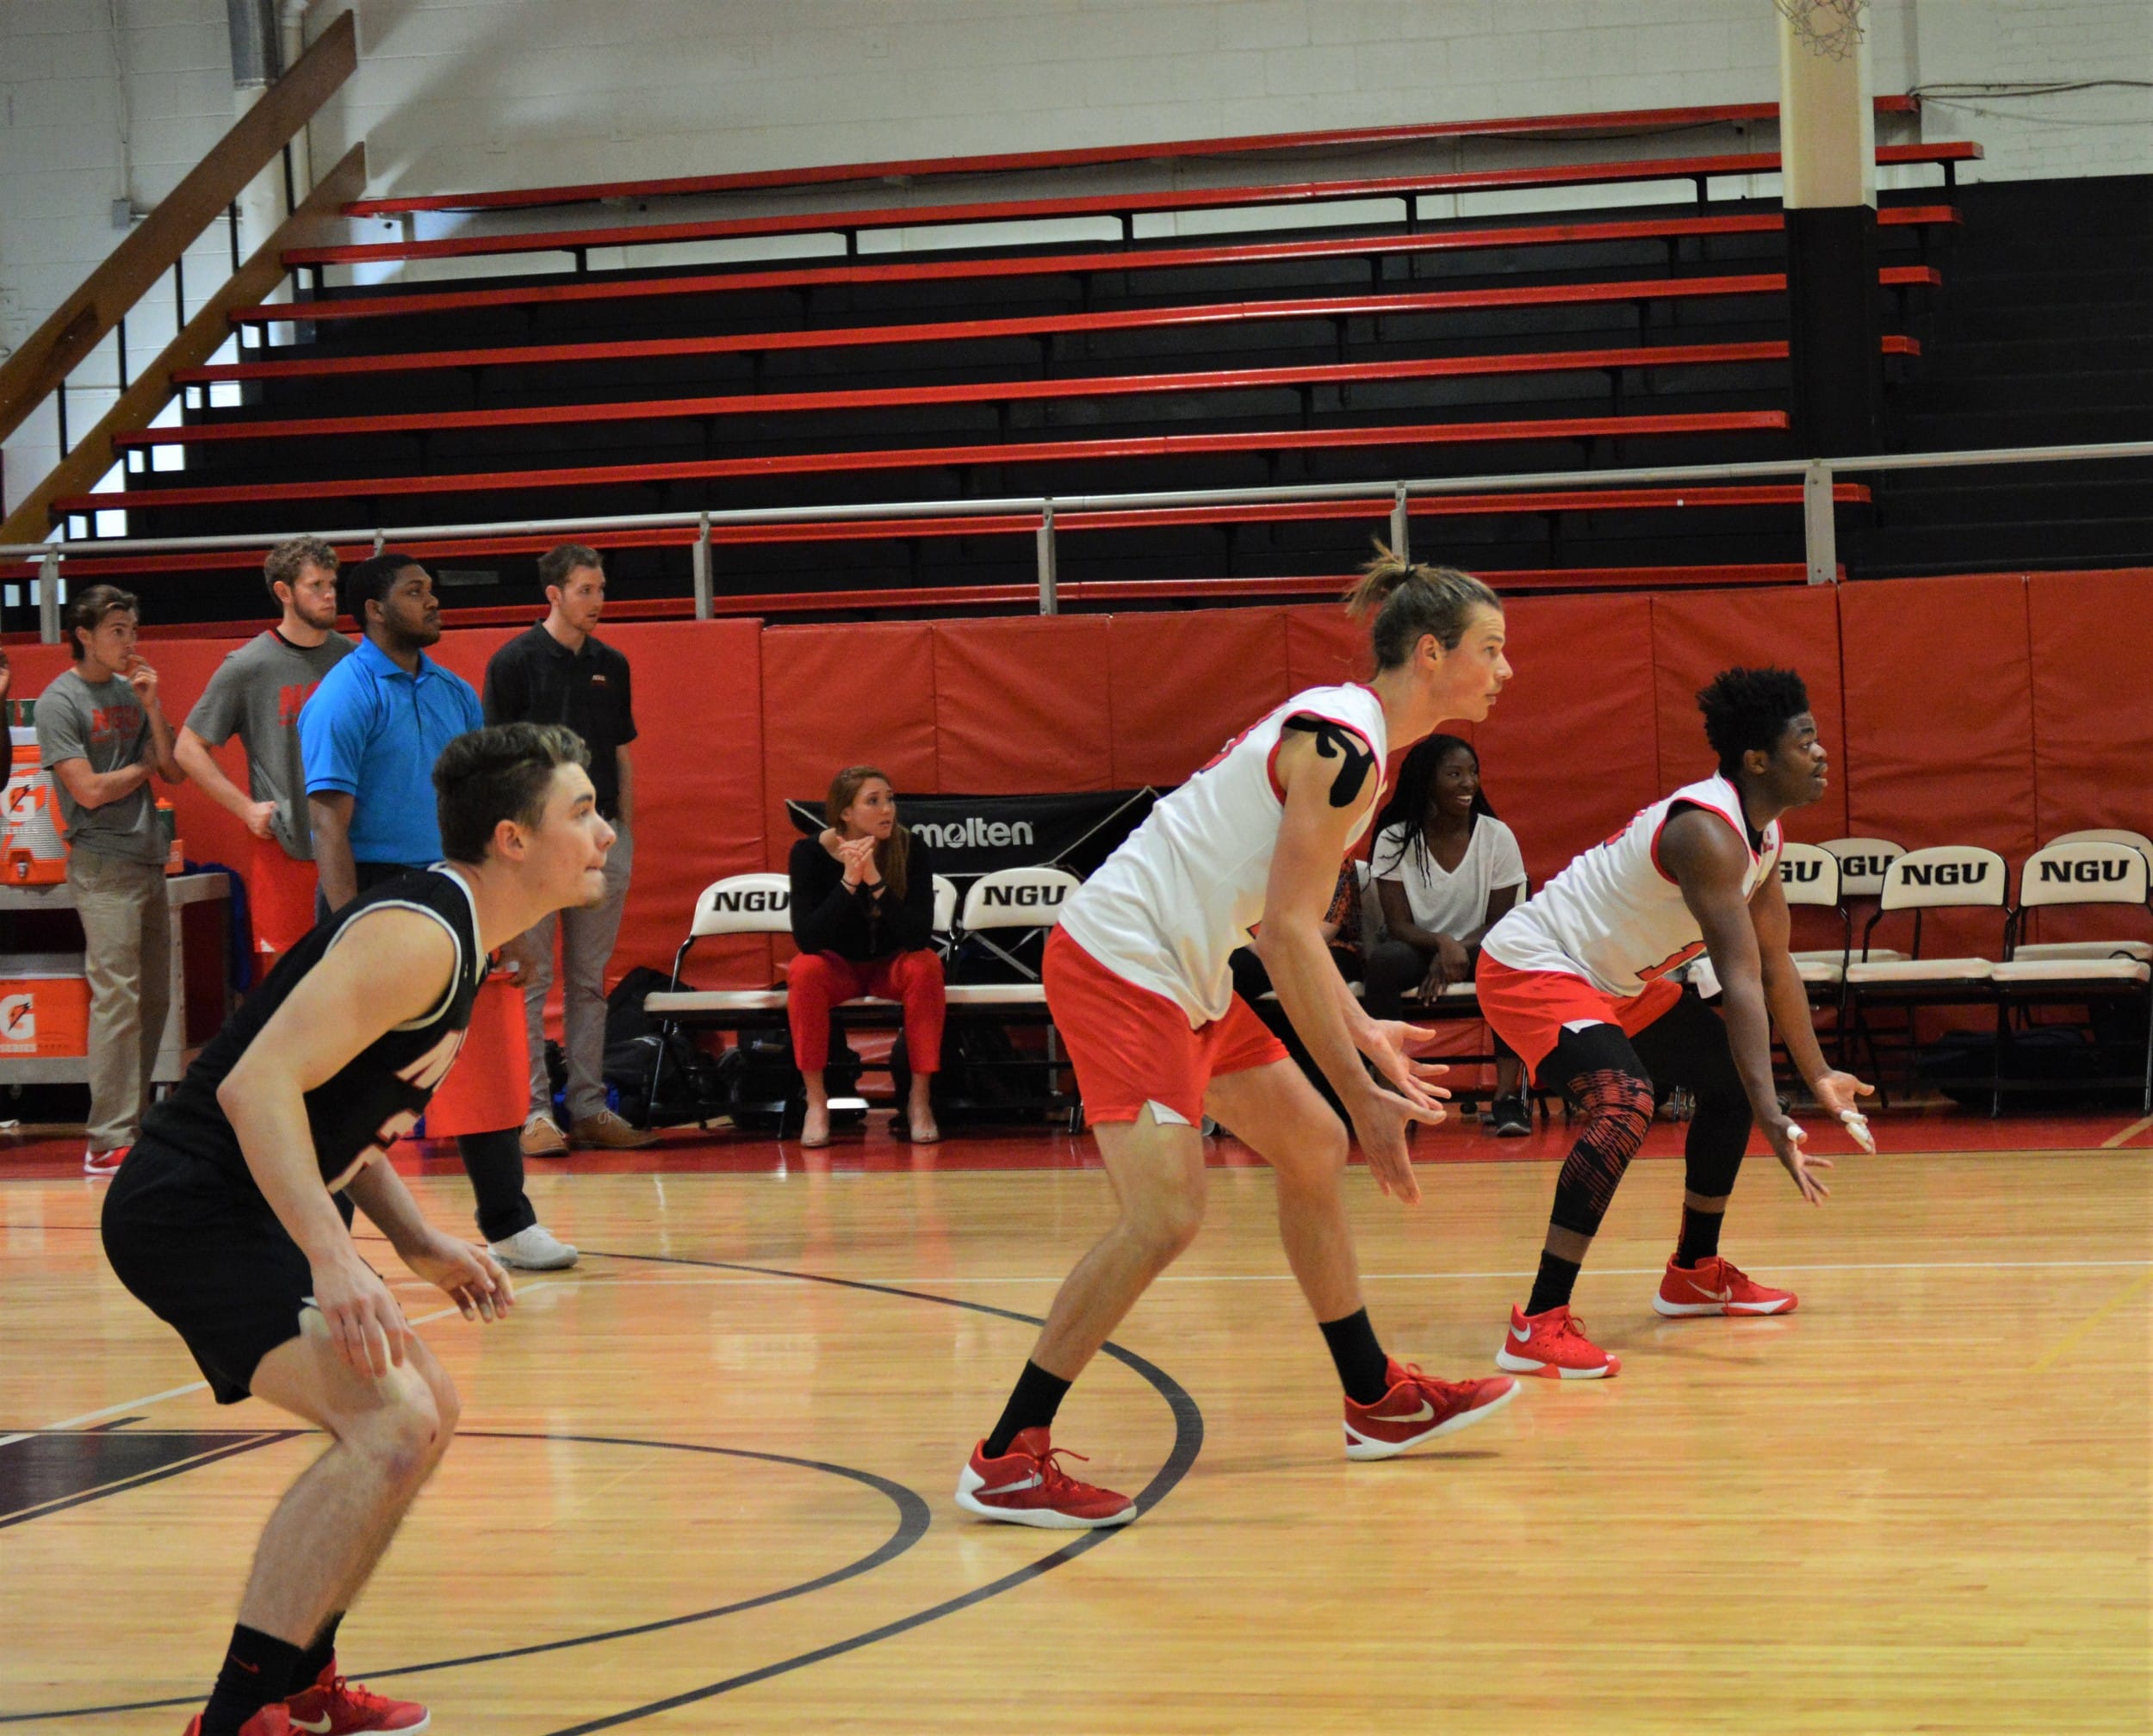 Dustin King, Jon Childes and Caleb Arelus wait for the other team to serve the ball.